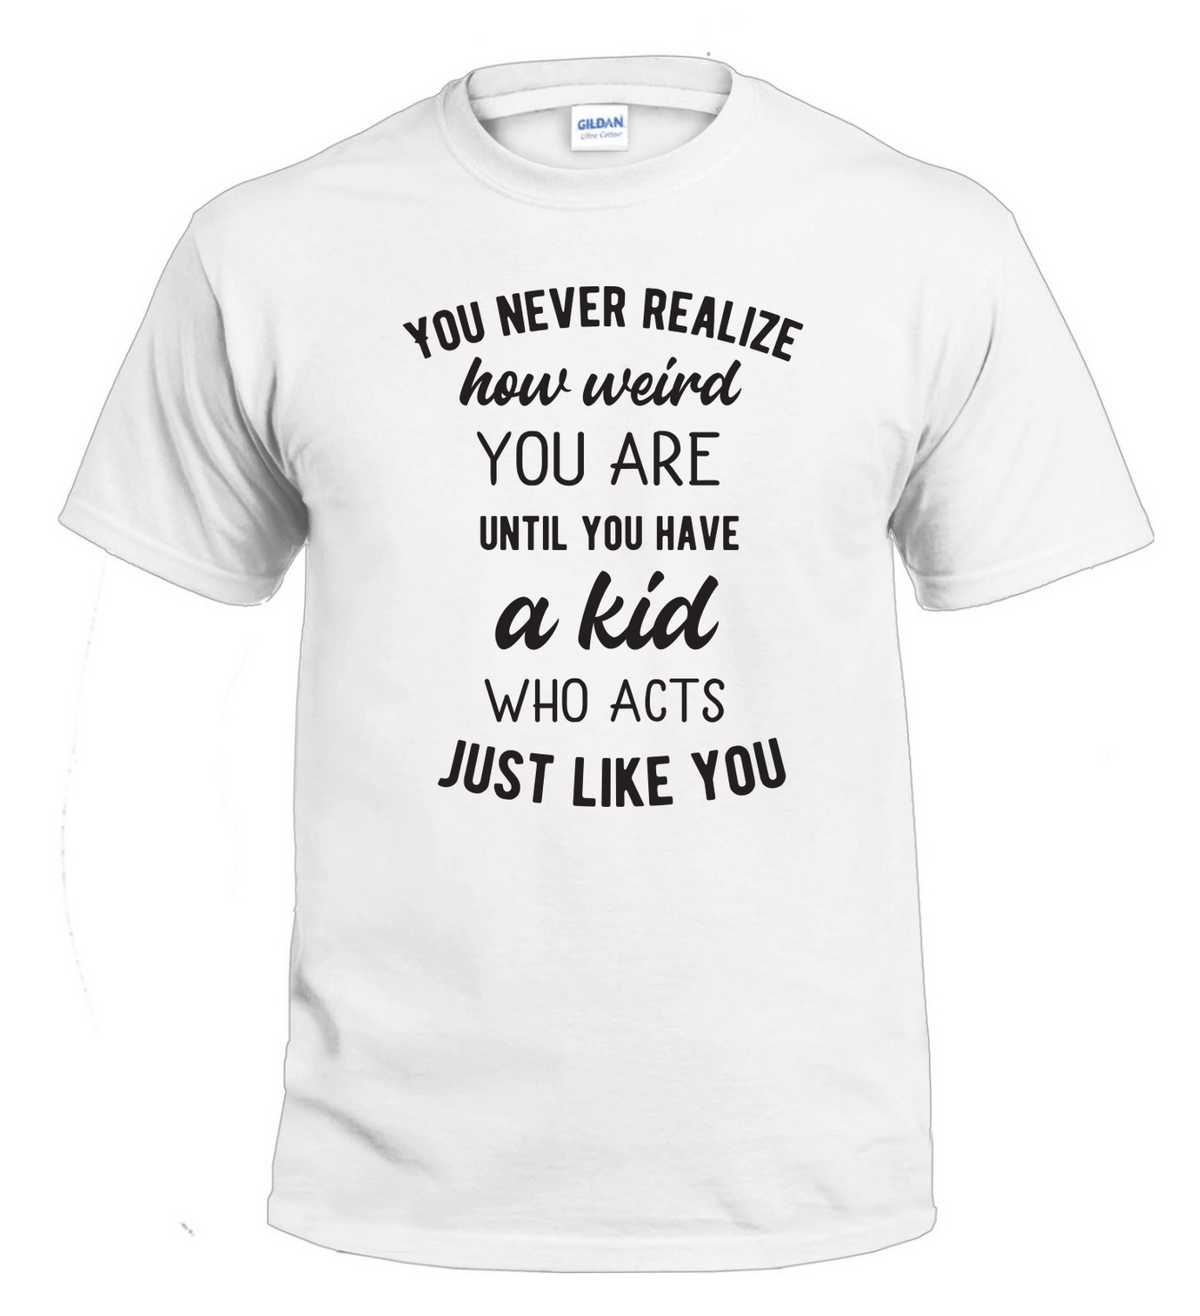 You Never Realize How Weird You Are mom t-shirt